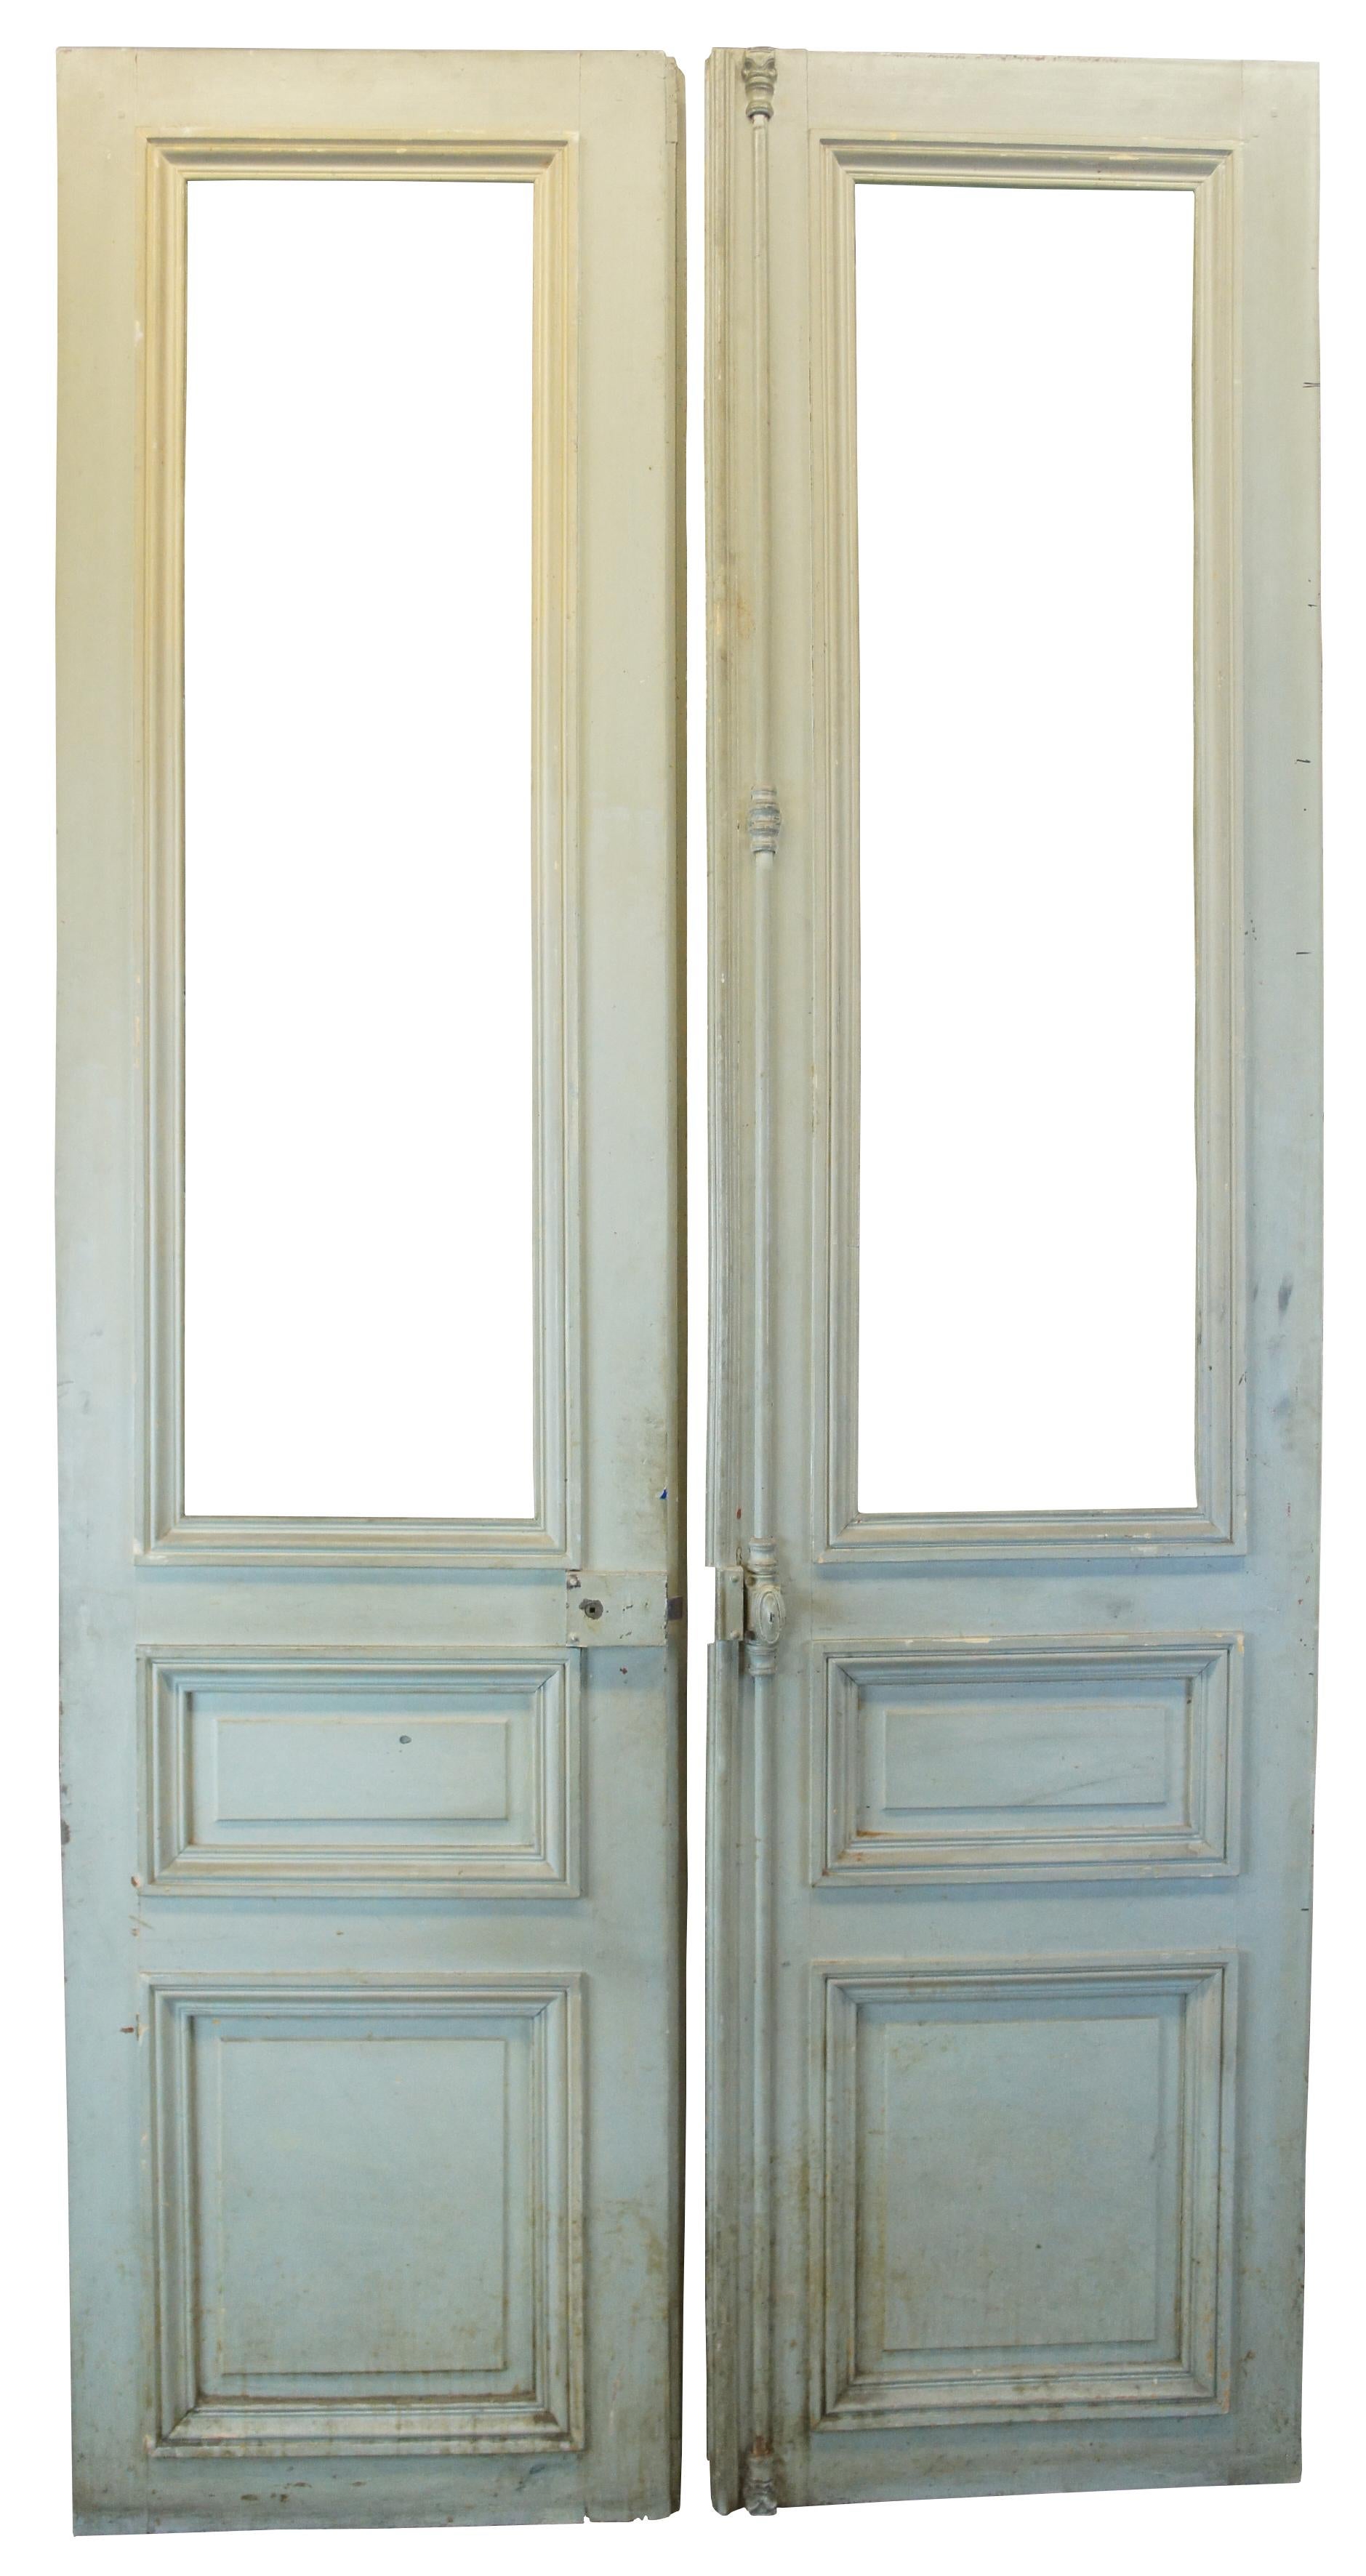 Monumental late Victorian French double doors featuring paneling on both sides and an iron cremone bolt lock hardware.

Measures: 55